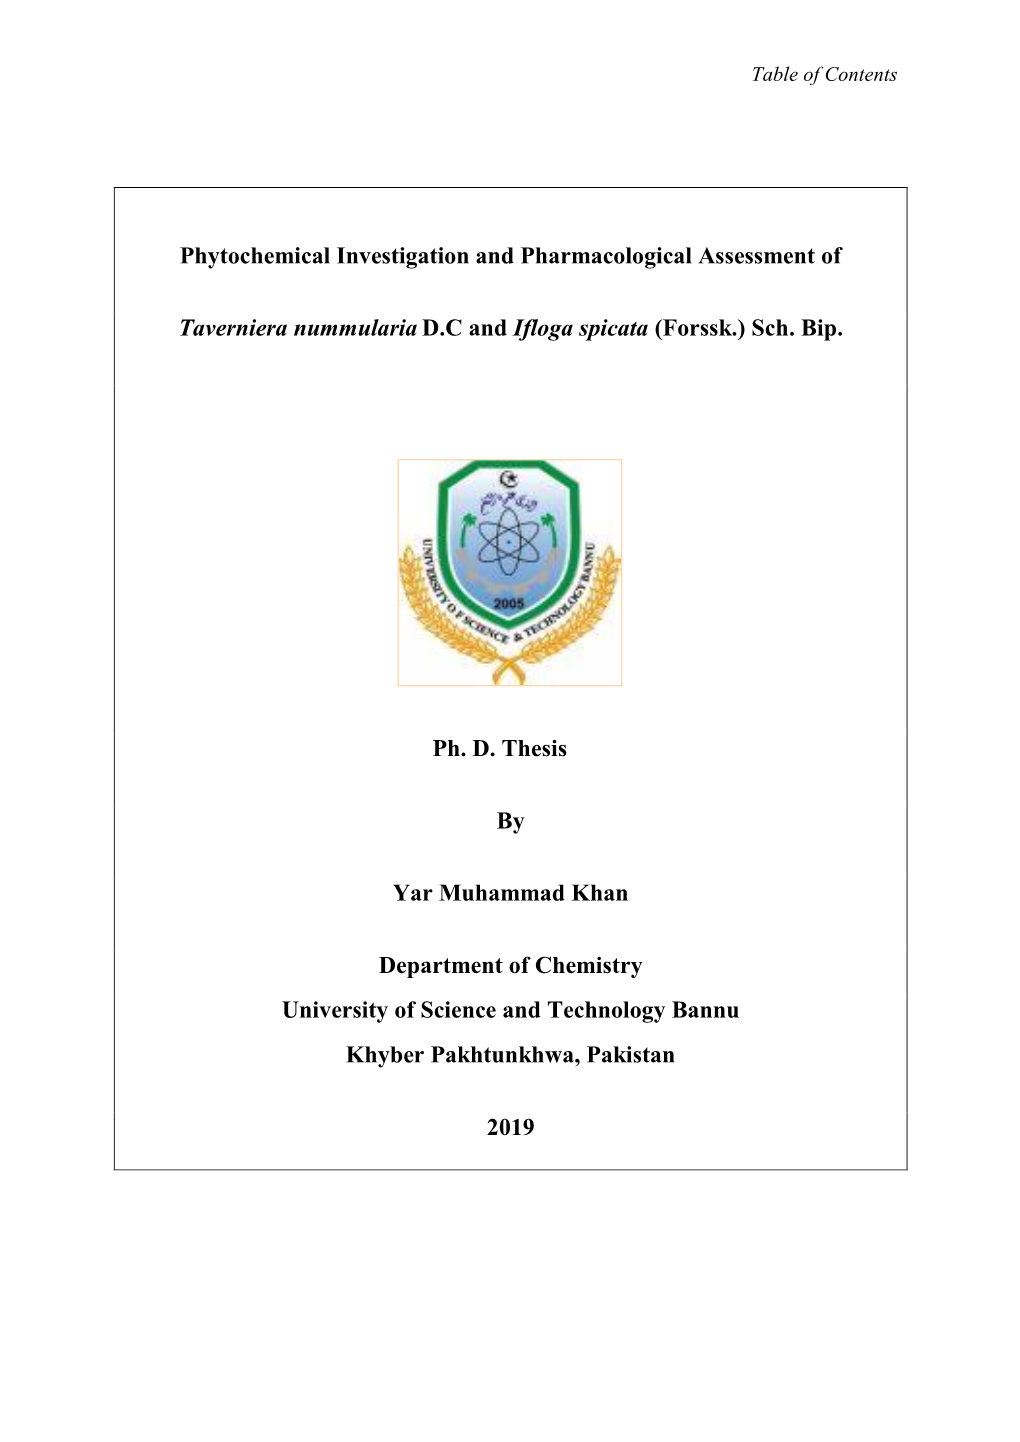 Phytochemical Investigation and Pharmacological Assessment Of